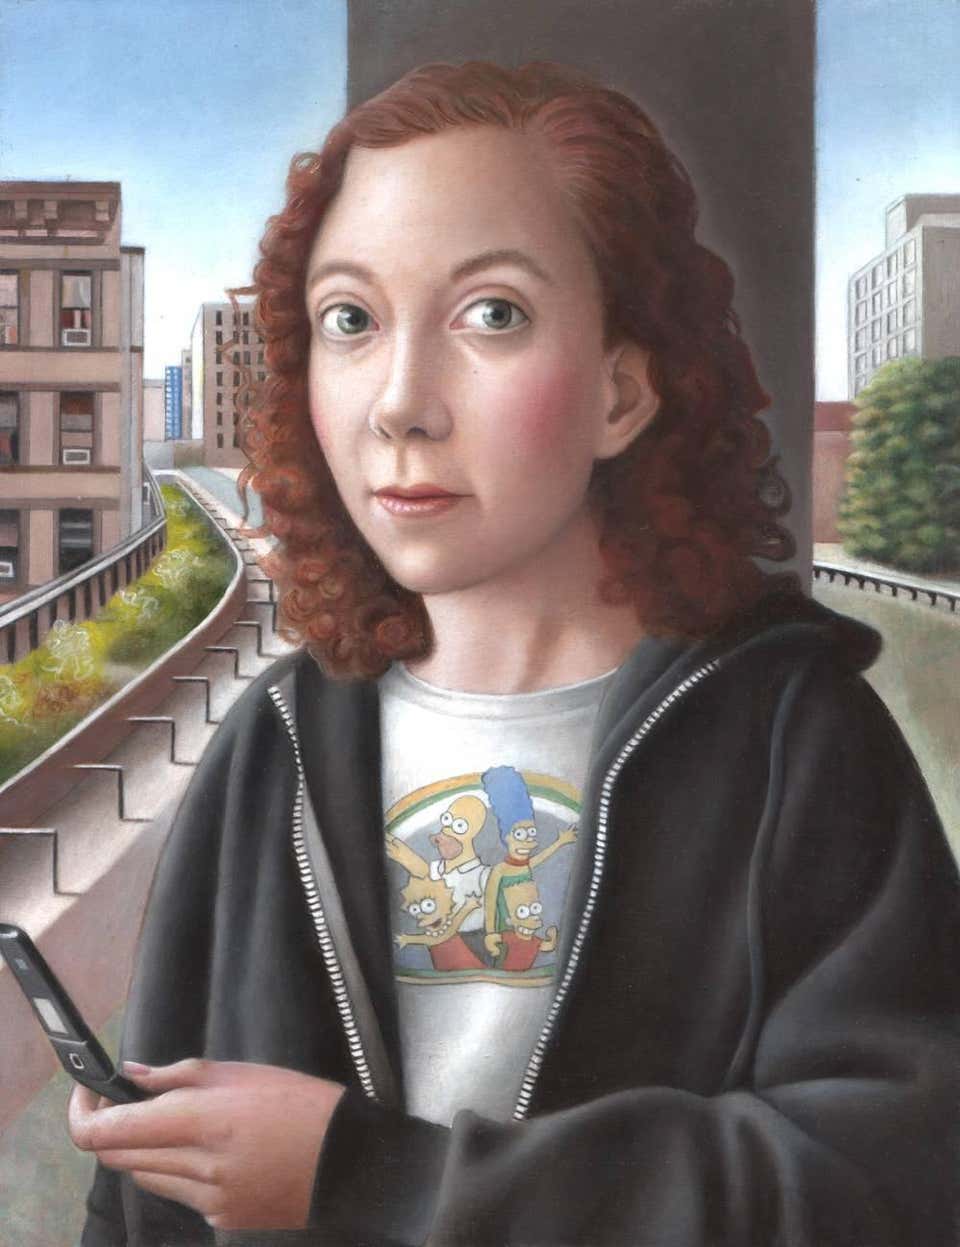 Amy Hill, "Woman with Flip Phone"